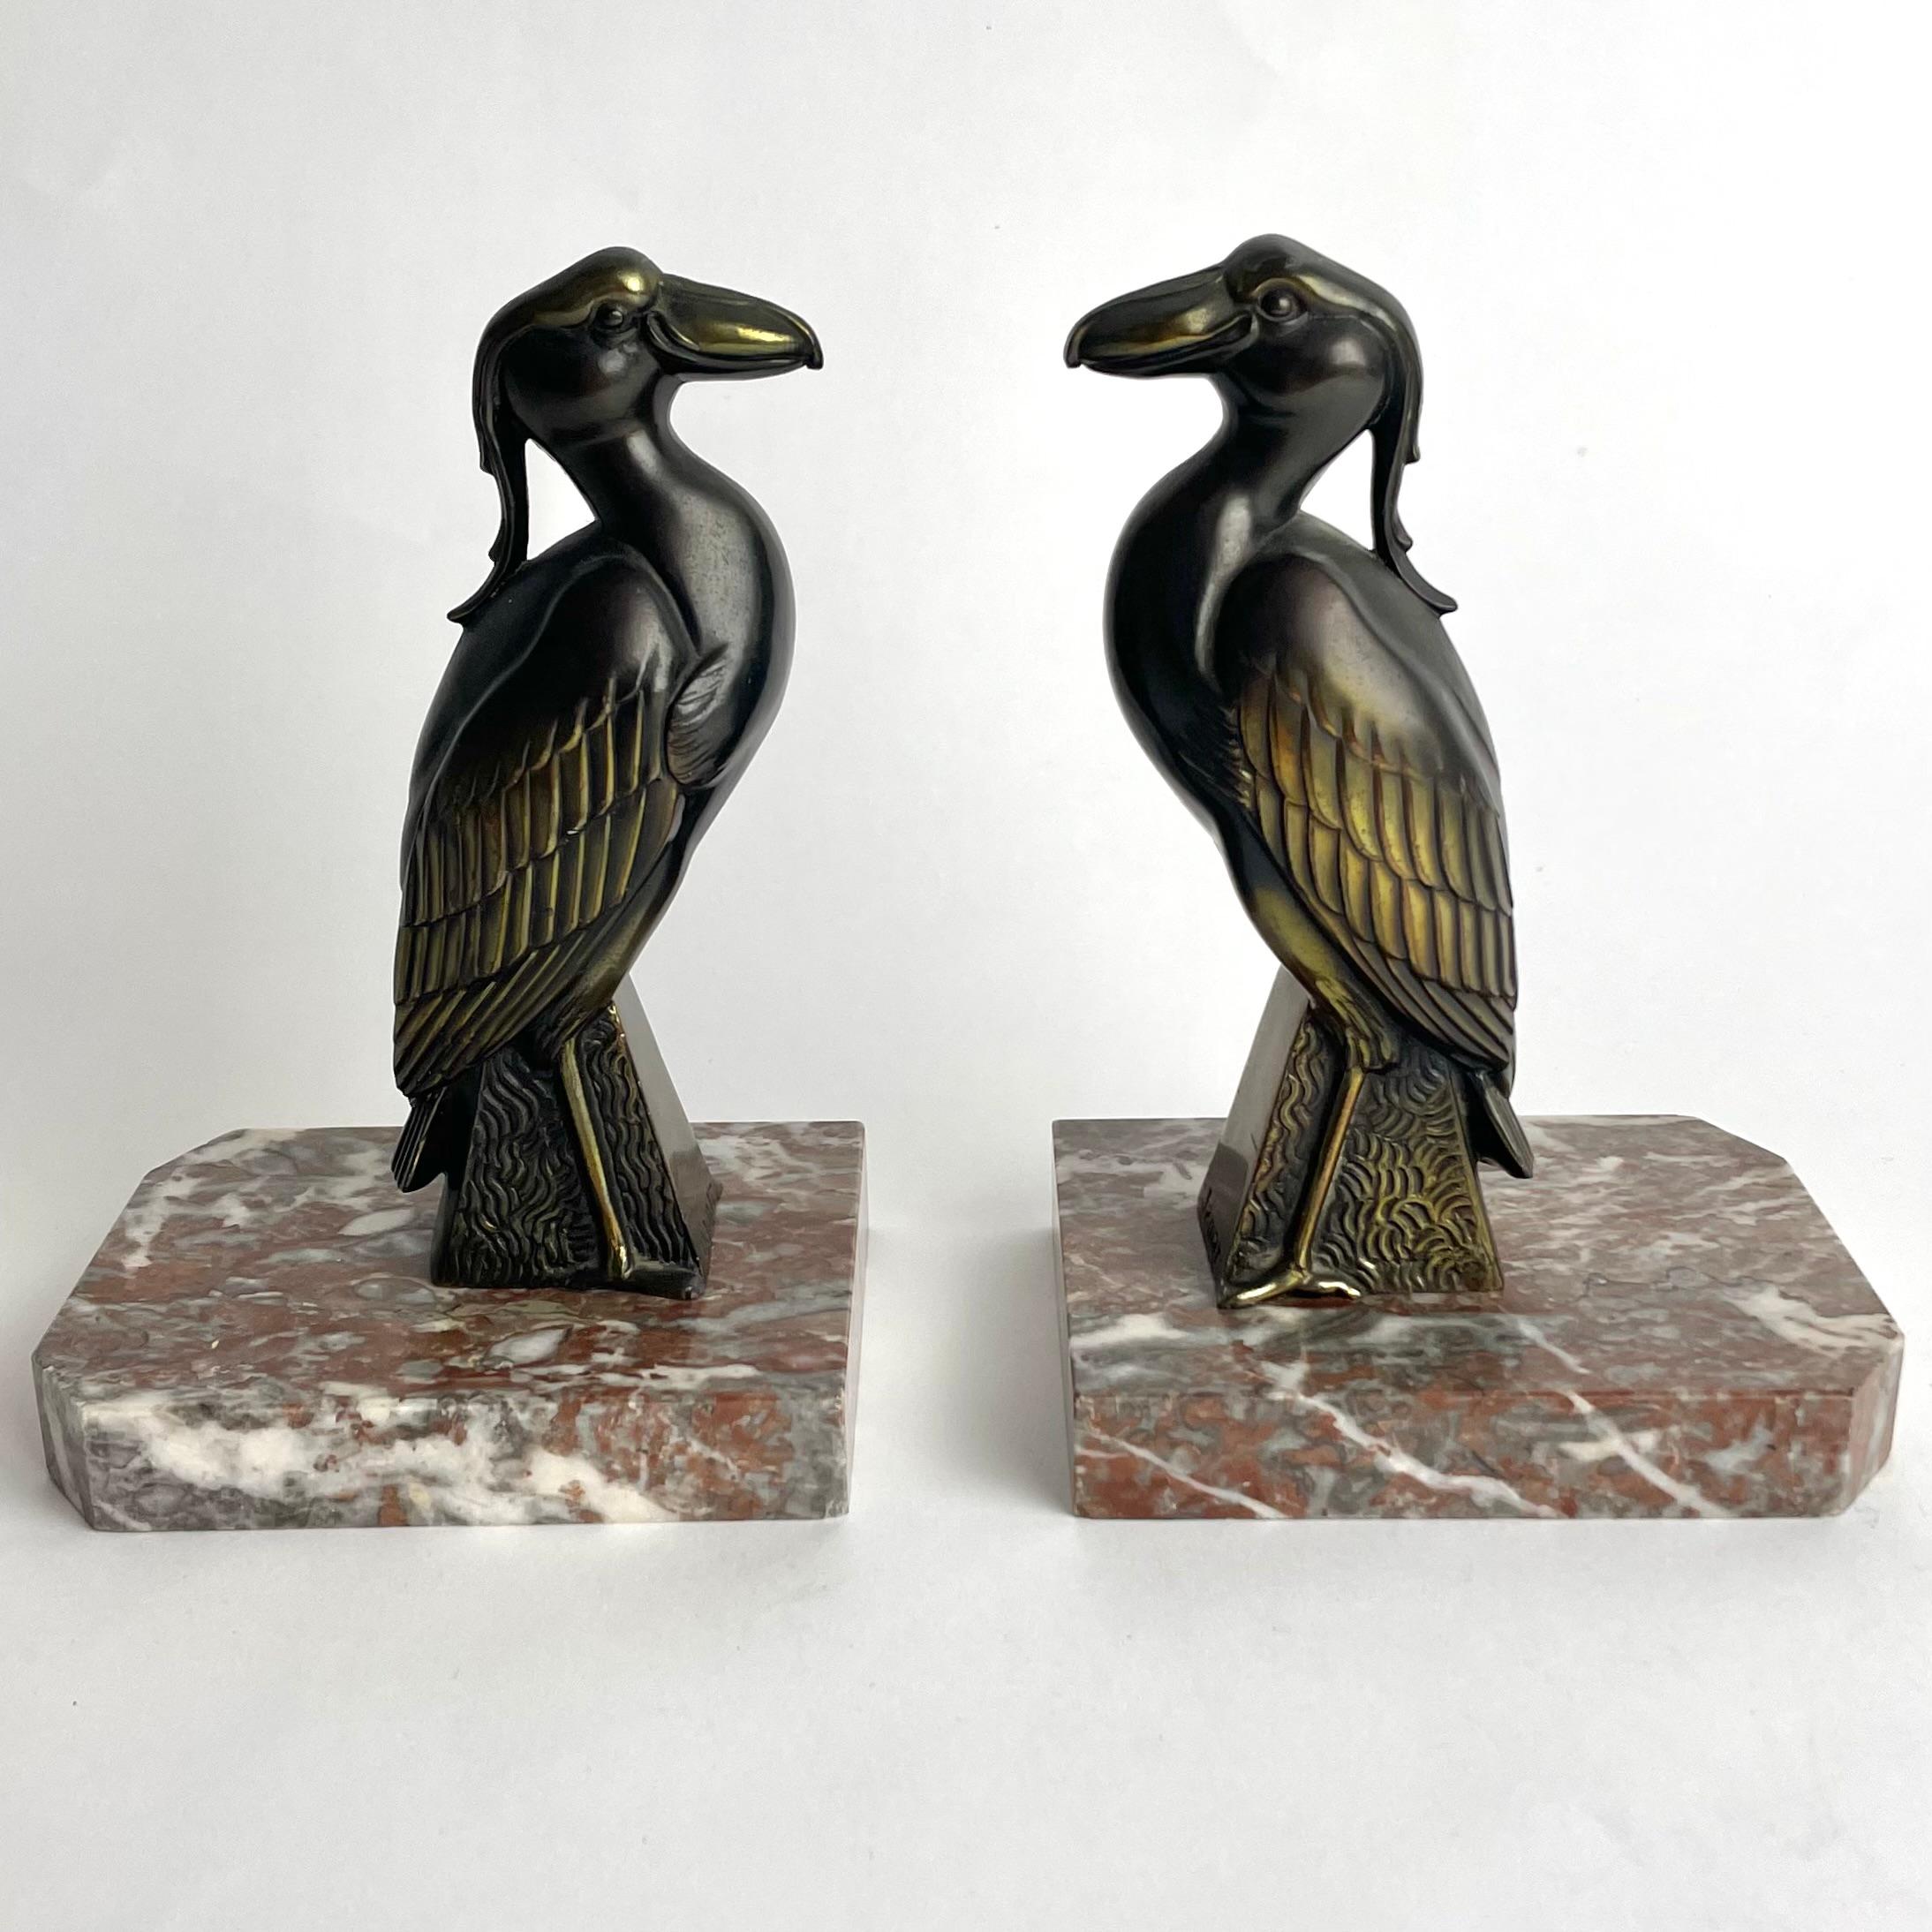 A pair of Bookends with birds signed Jamar in period Art Deco from the 1930s. Made in France by Jamar in patinated metal with a marble base. Period and beautiful birds.

Wear consistent with age and use